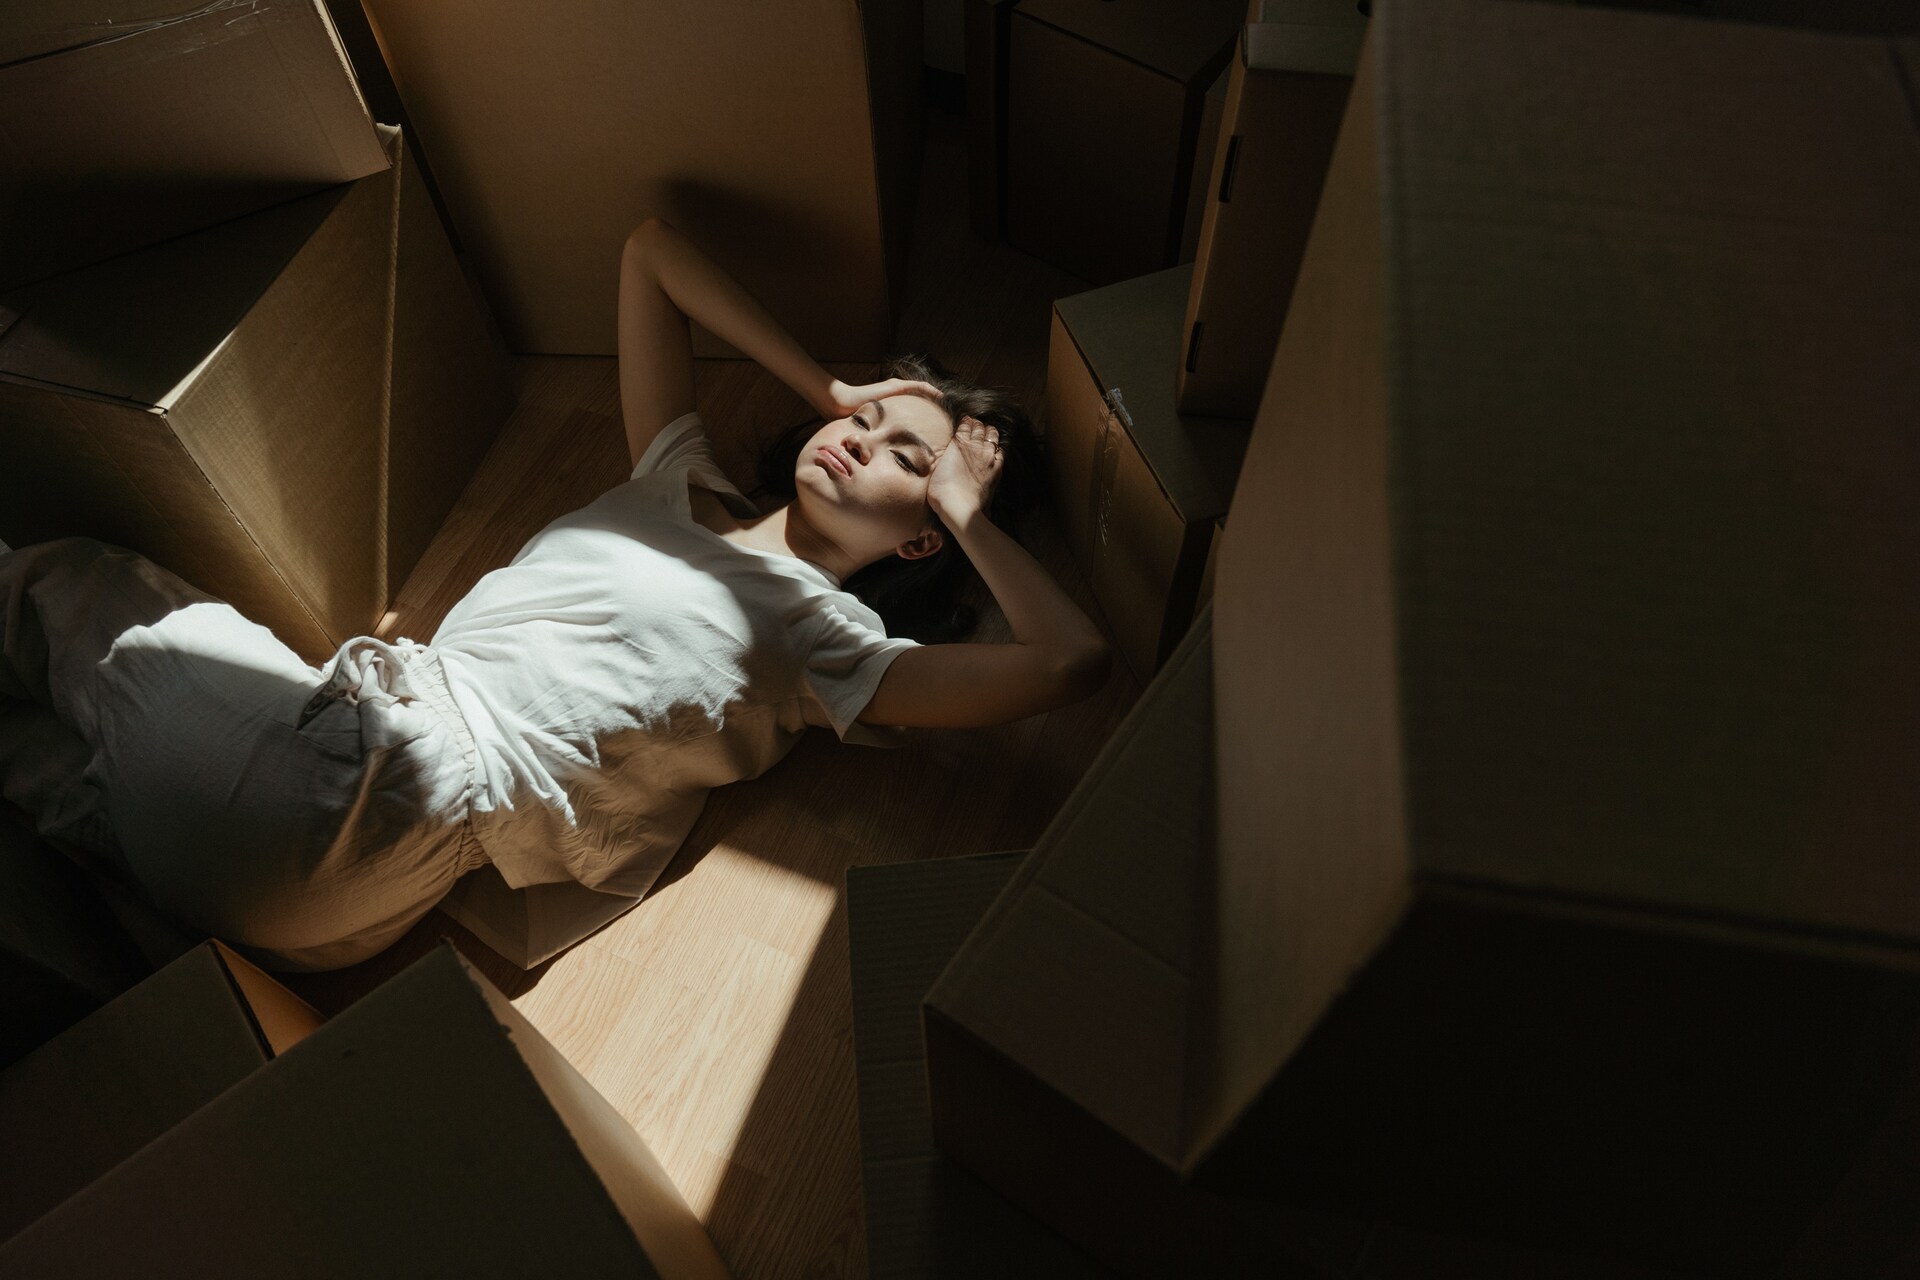 A woman in a white shirt among boxes